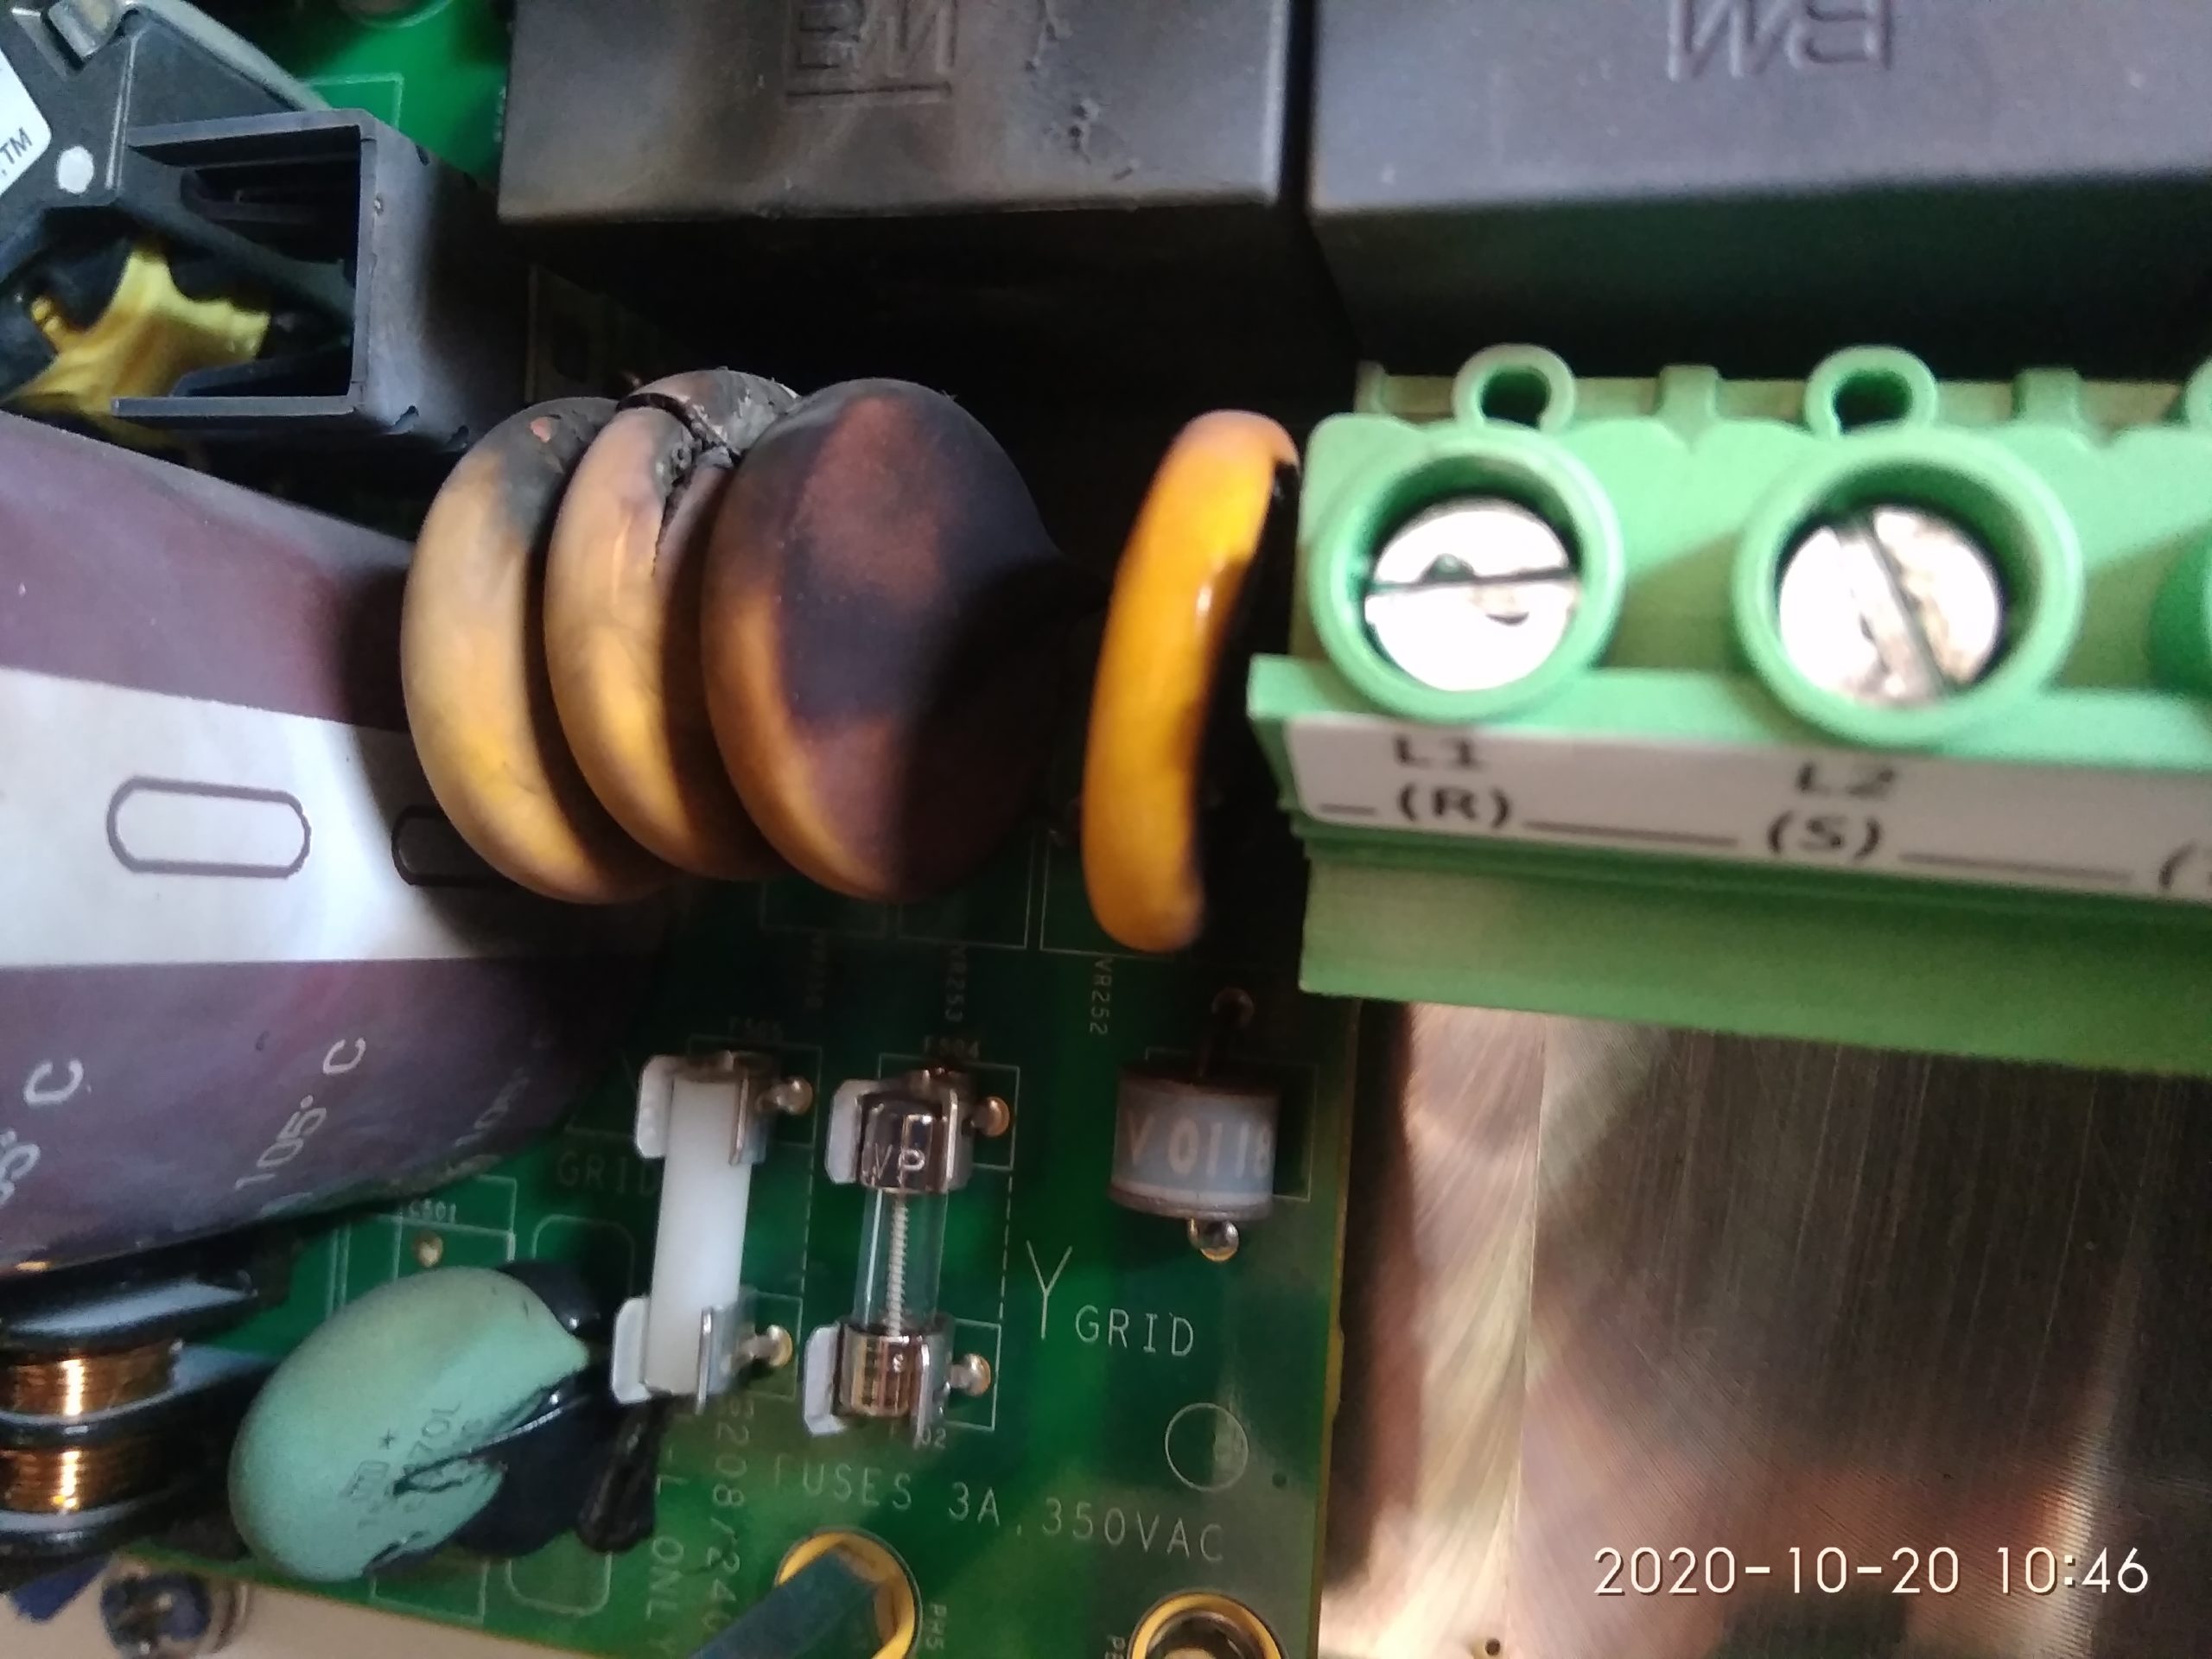 A damaged Surge Protection Device.